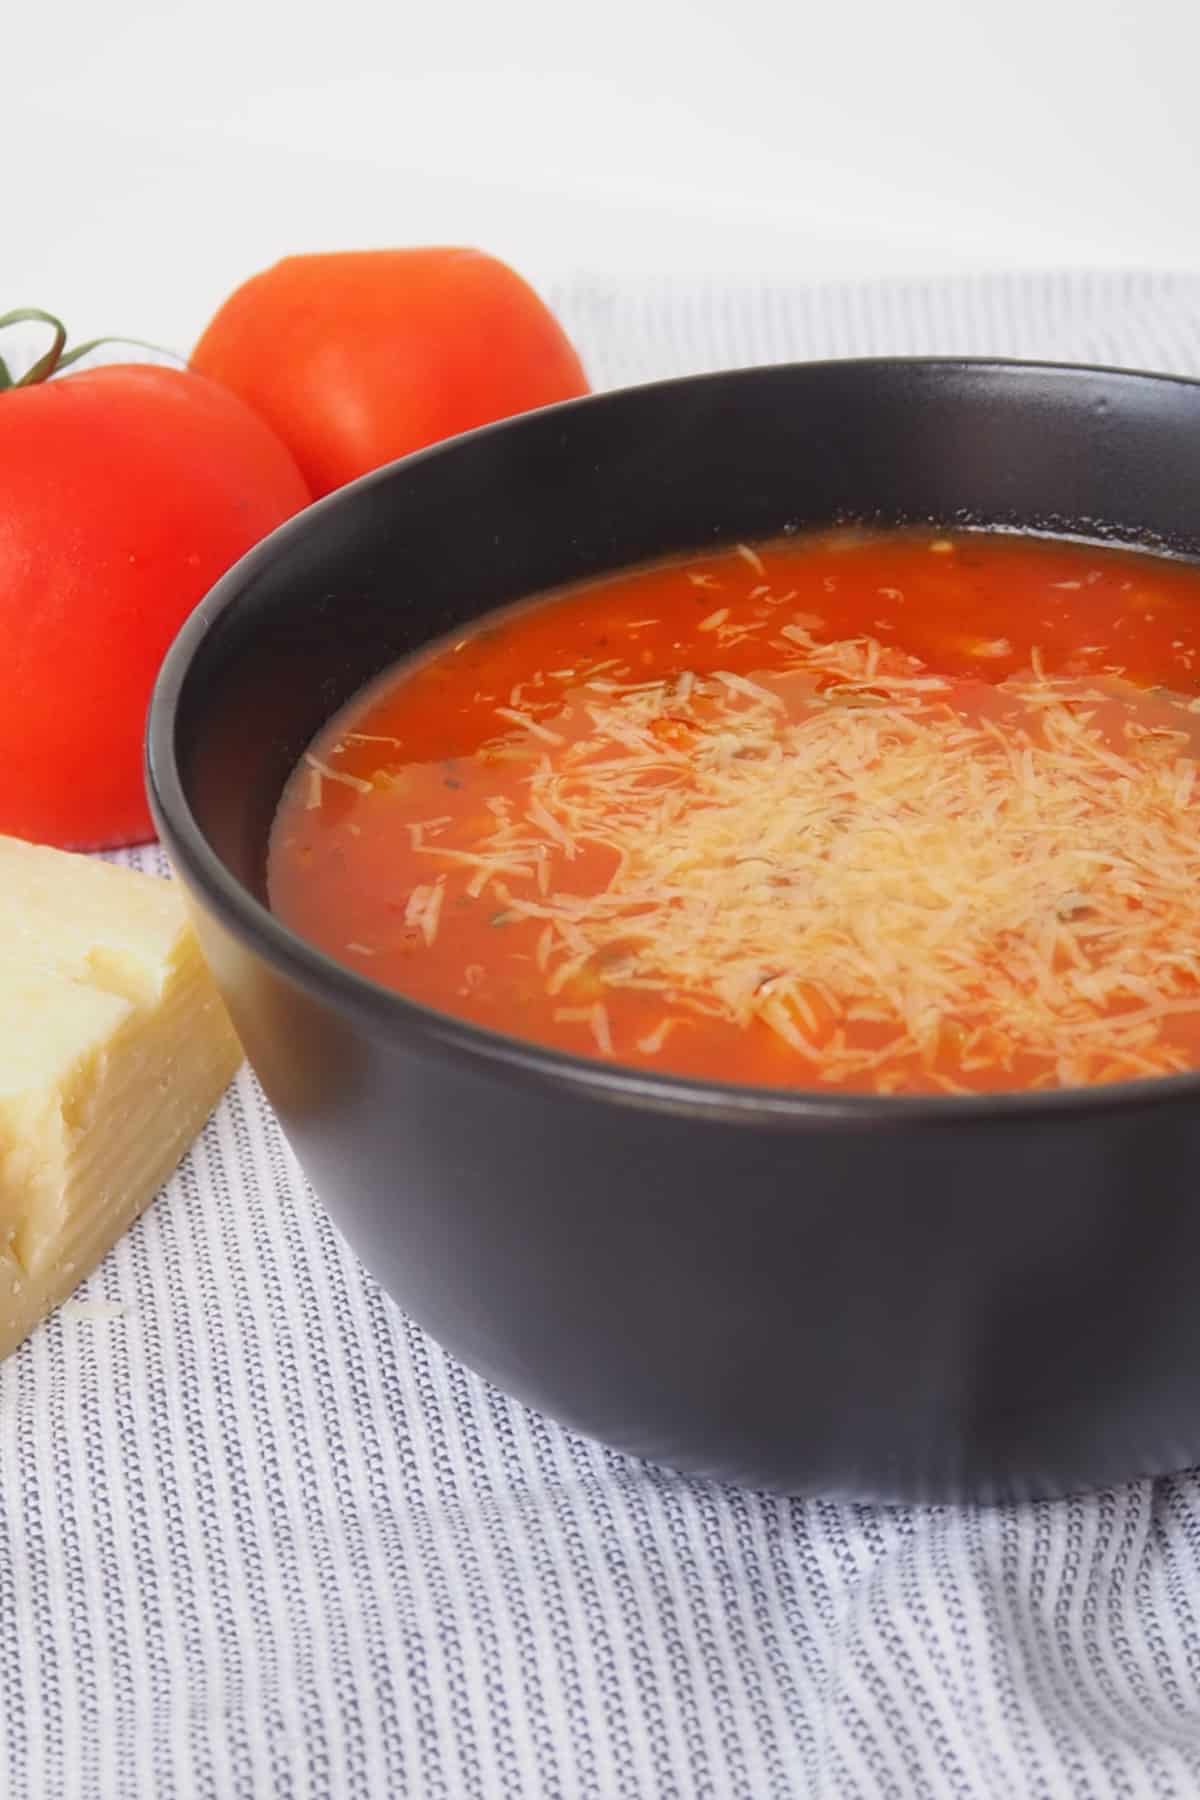 Side view of Spicy Tomato Soup in a black bowl that is topped with grated parmesan cheese.